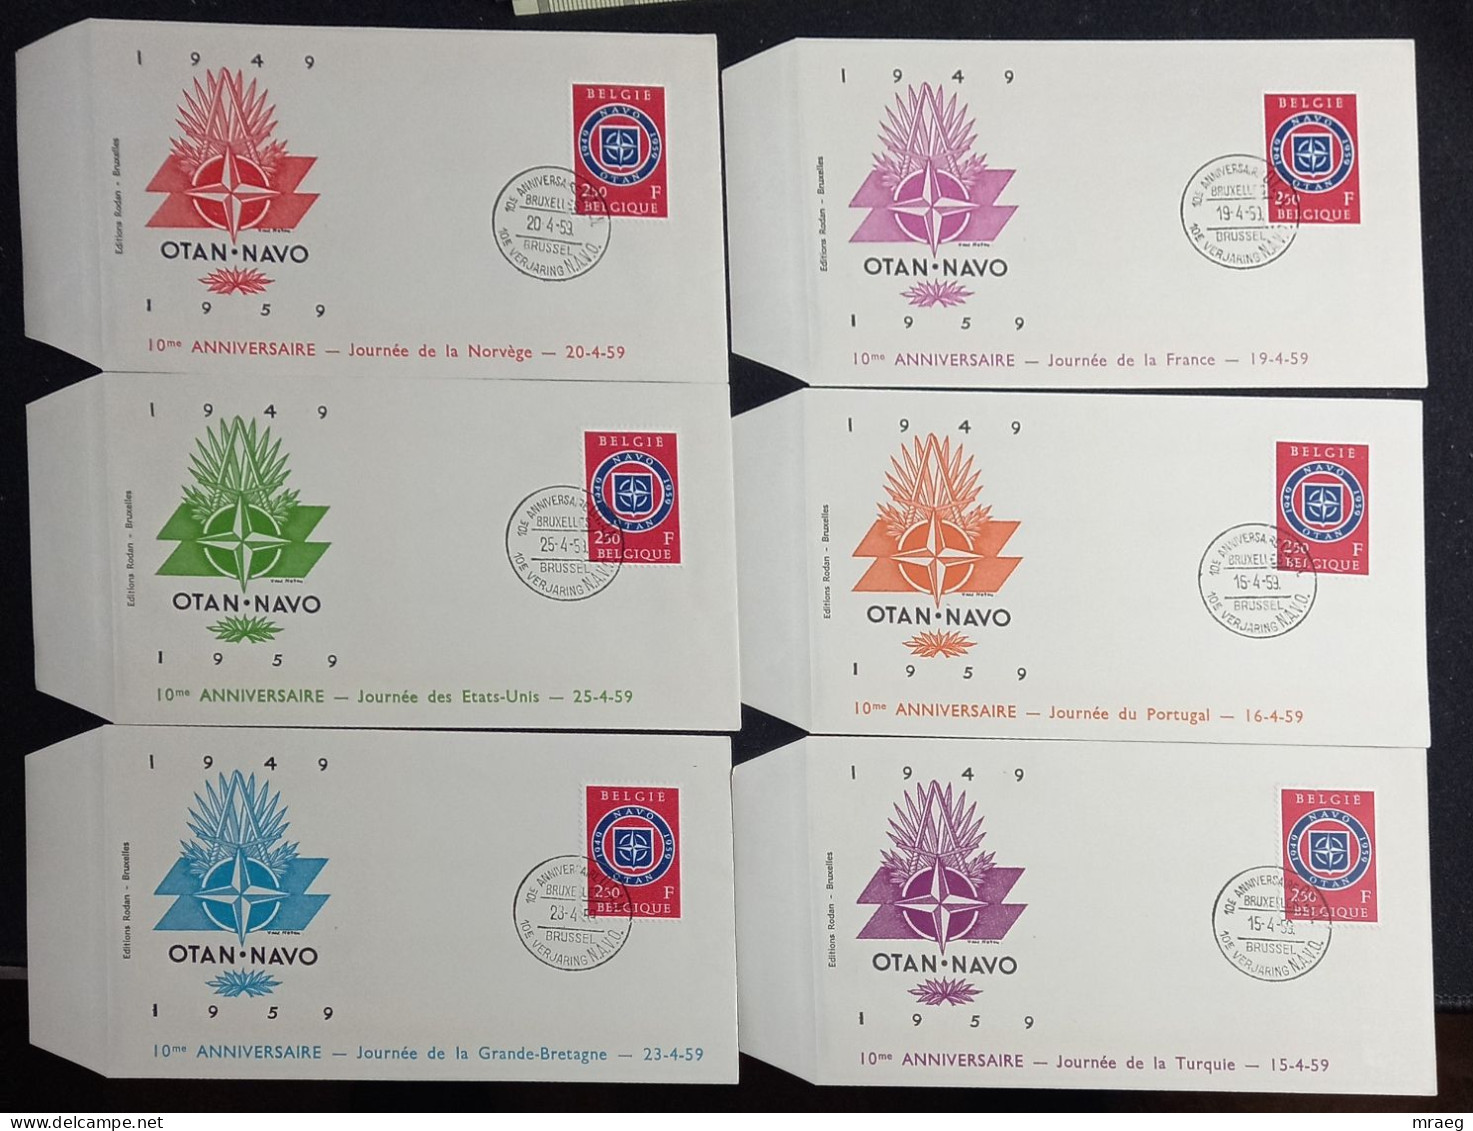 BELGIUM 1959 The 10th Anniversary Of NATO FDC Covers SET 12 Covers Together. - Covers & Documents